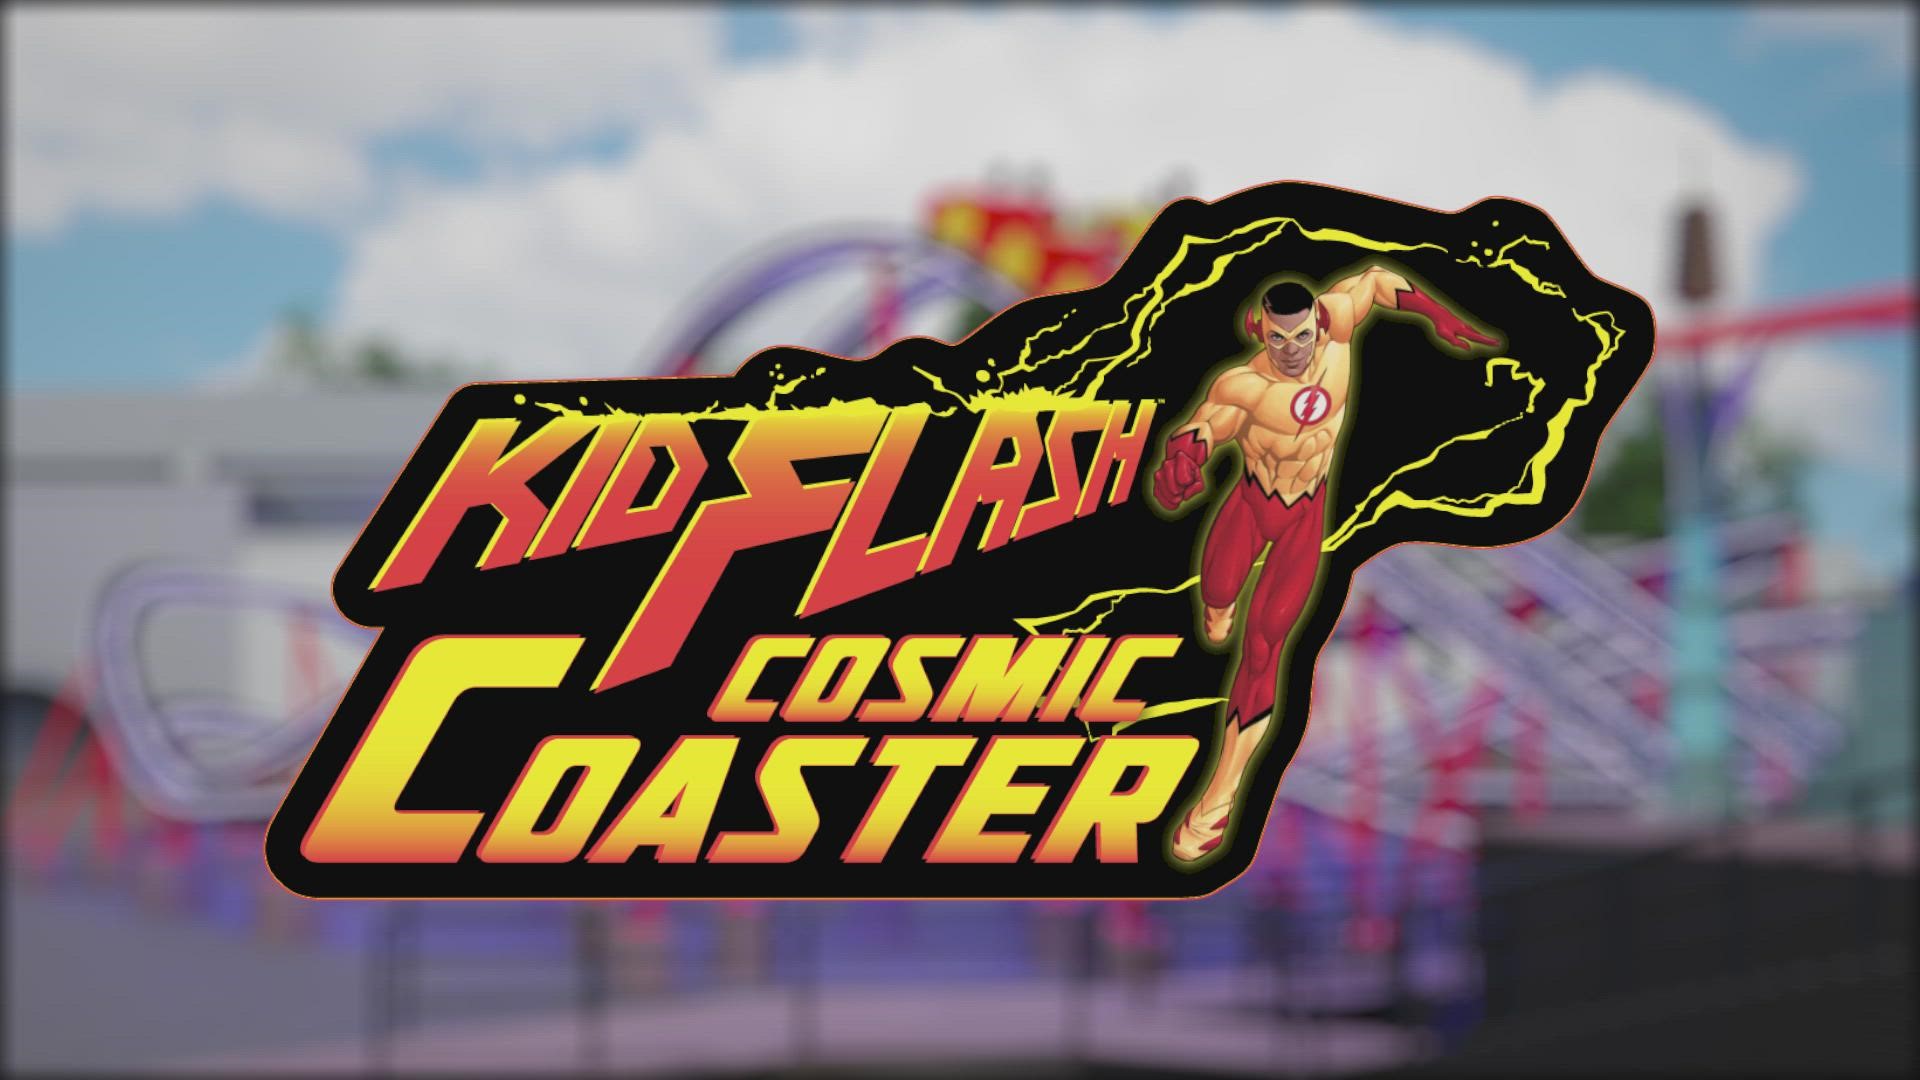 The all-new KID FLASH Cosmic Coaster is a twin-tracked roller coaster featuring single-rail track and comfortable seating for both adults and kids.